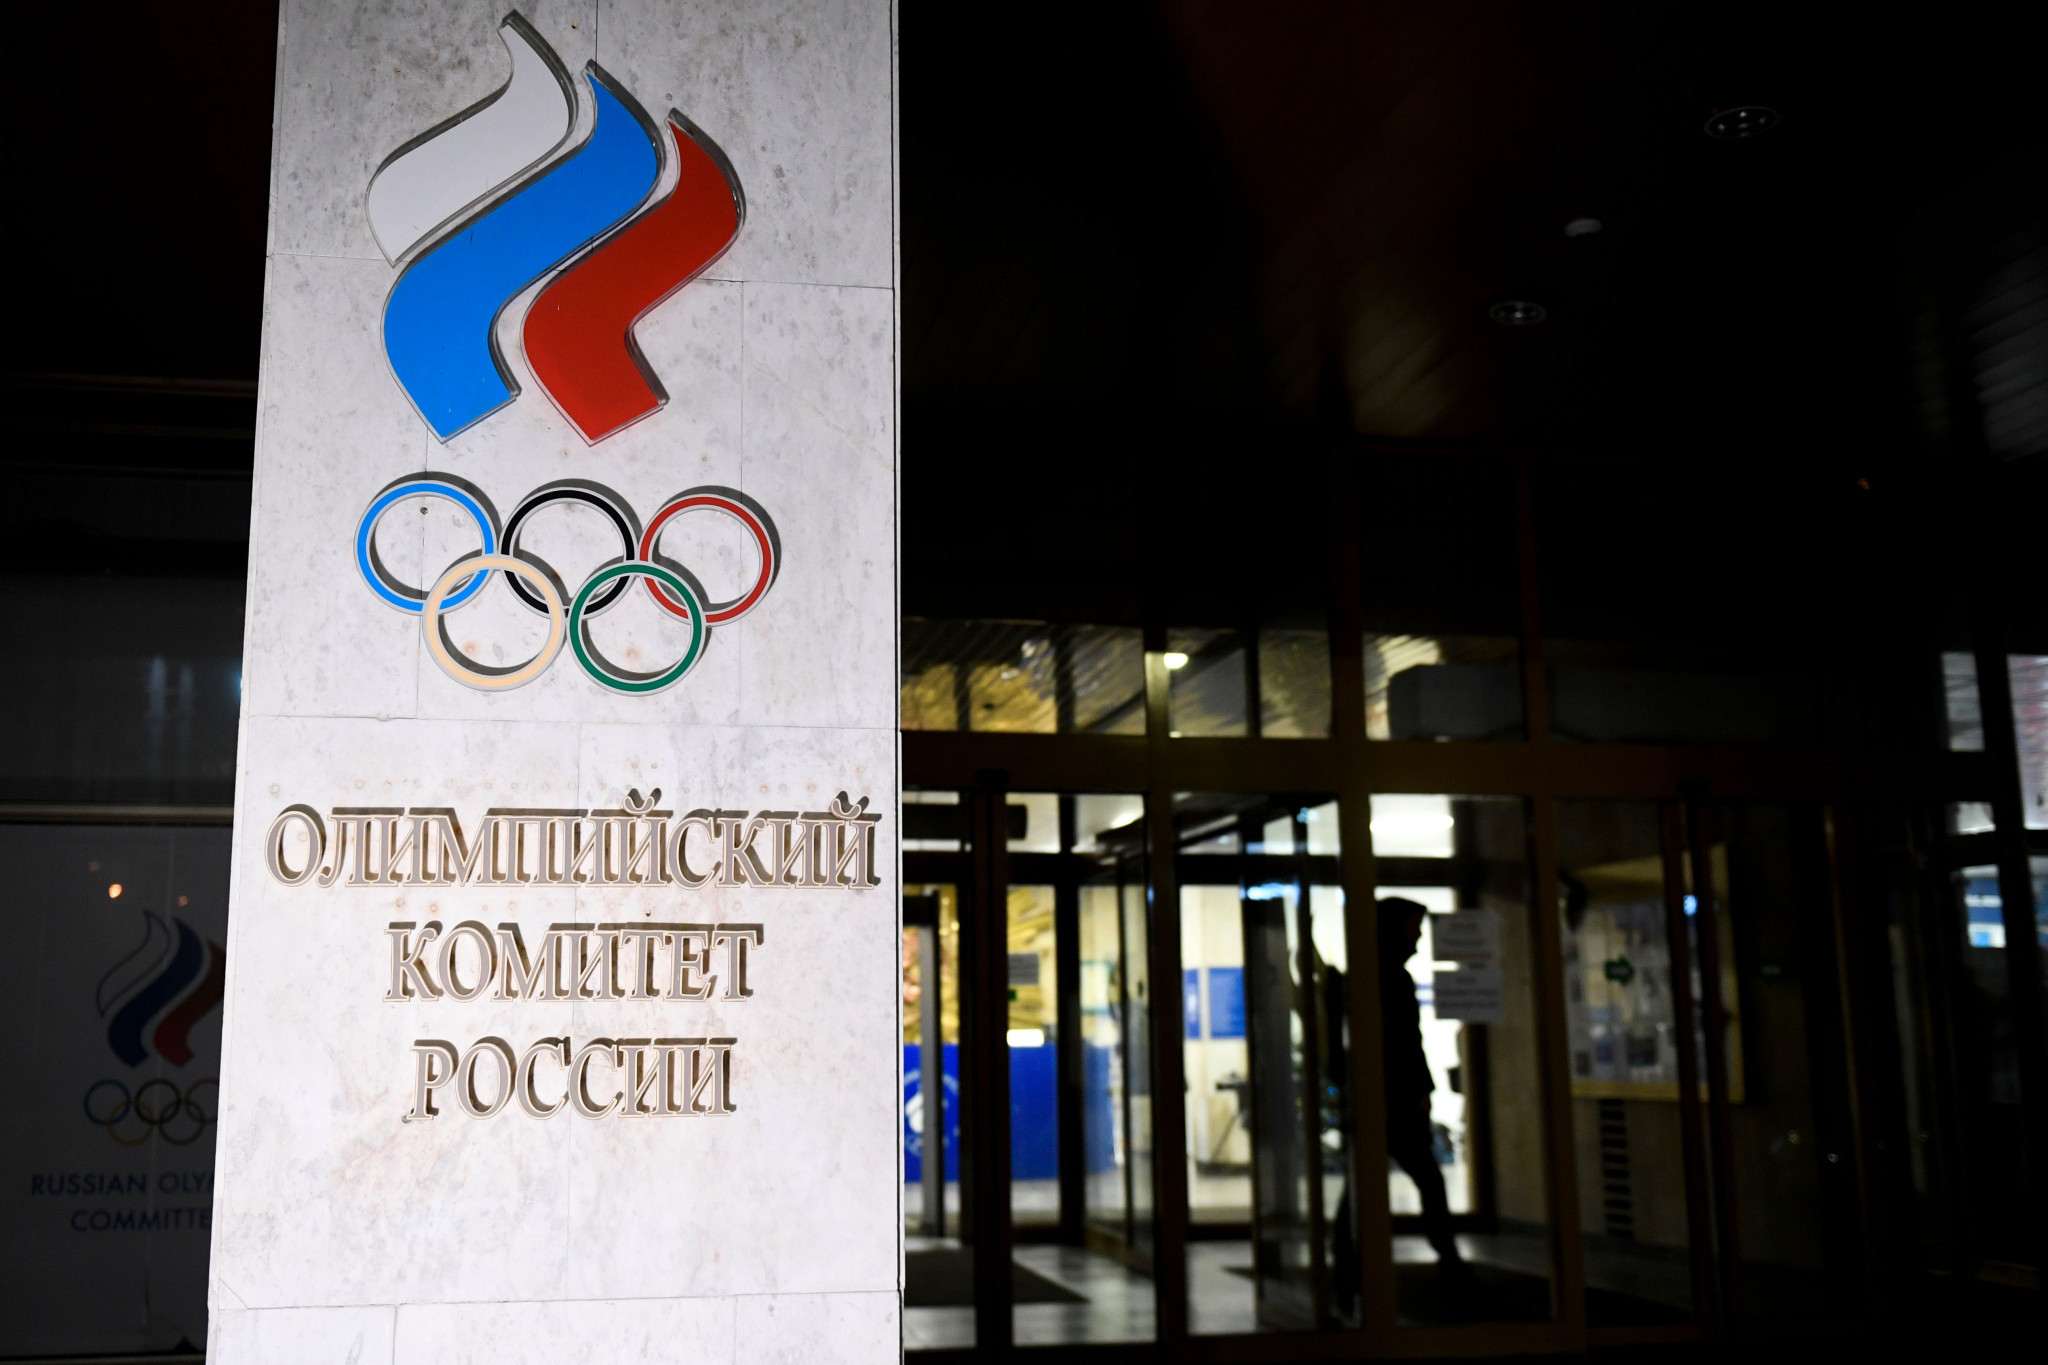 The Russian Olympic Committee will no longer be a founding member of RUSADA ©Getty Images